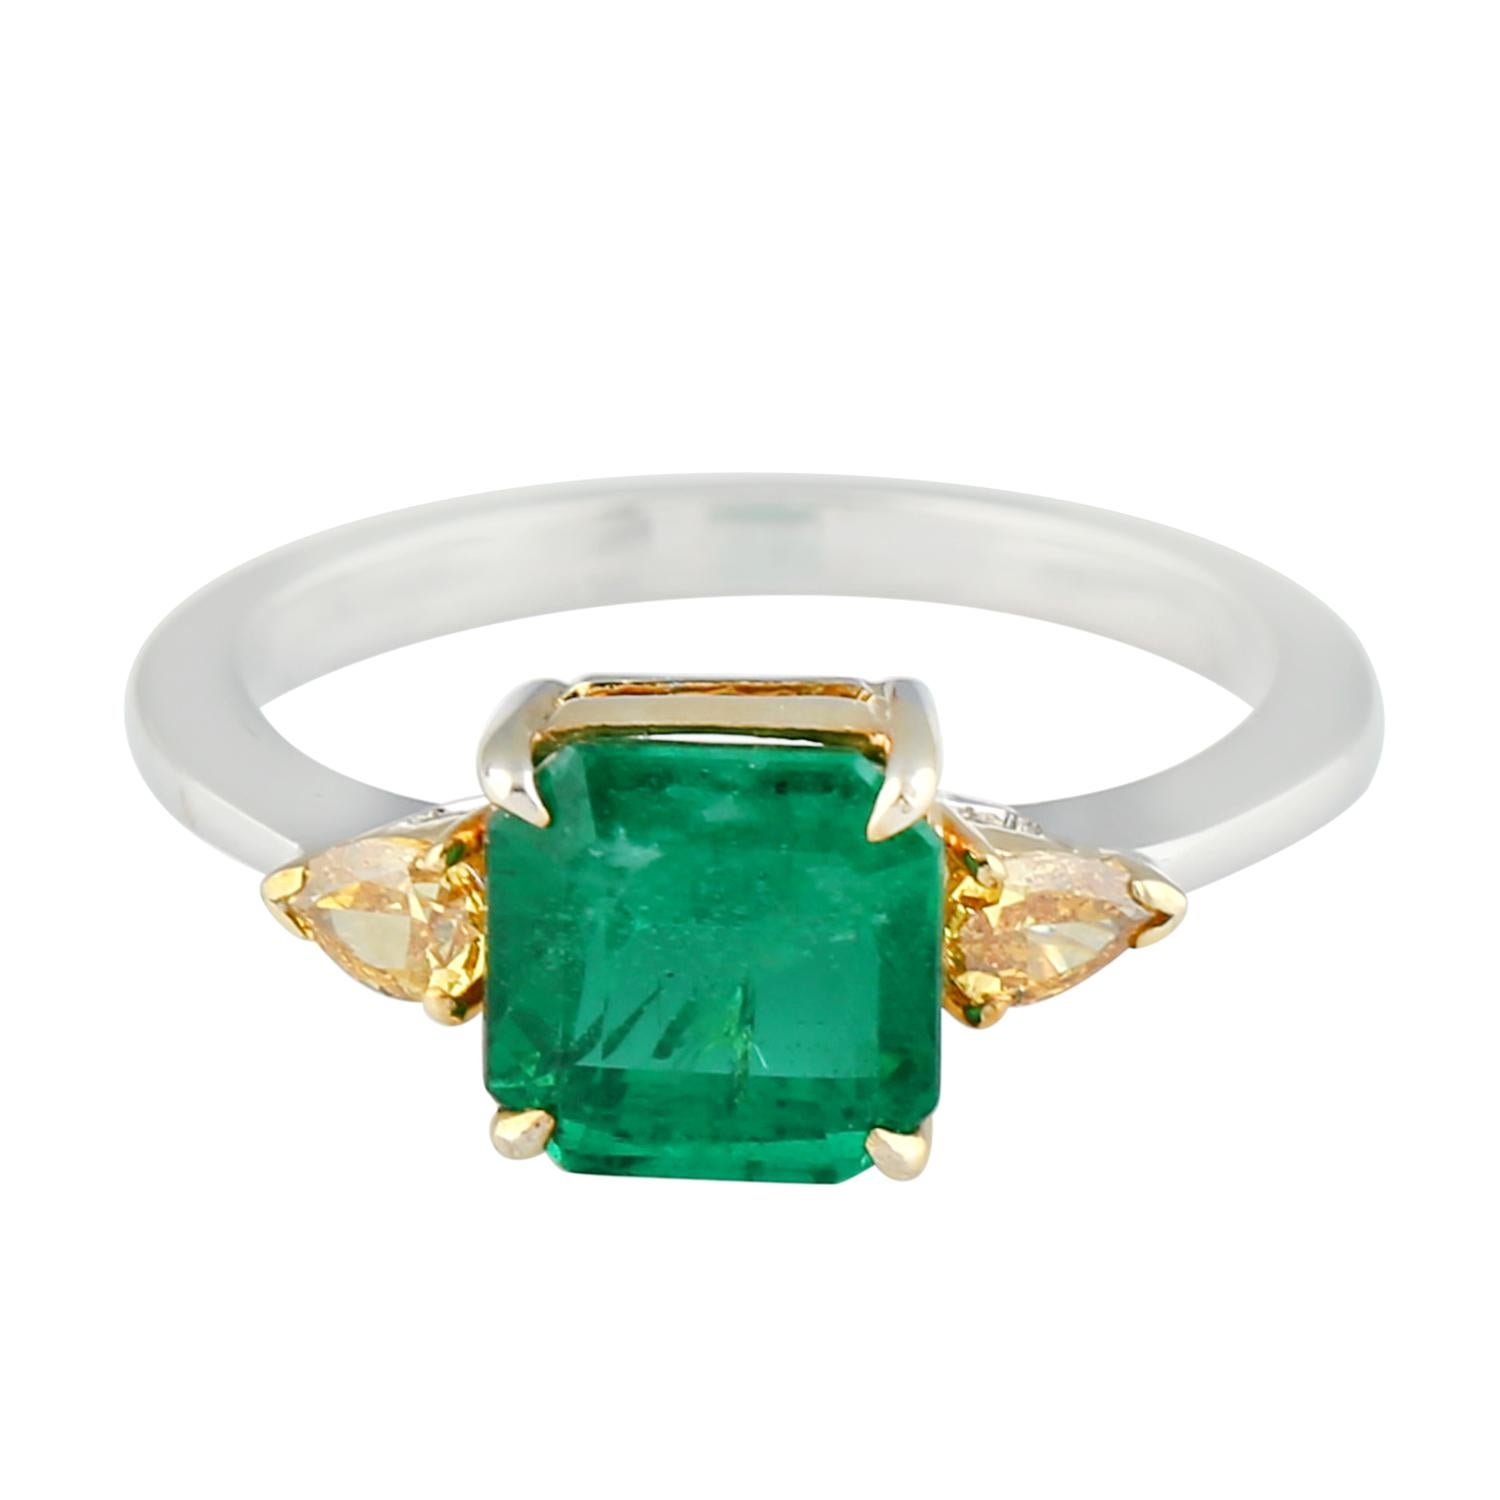 Evergreen Princess cut Emerald and pear shape yellow Diamond Ring in 18K Gold is perfect everyday ring.

Ring Size: 6.75 ( can be sized )

18K Gold: 6.4gms
Diamond: 1.1cts
Emerald: 2.31cts